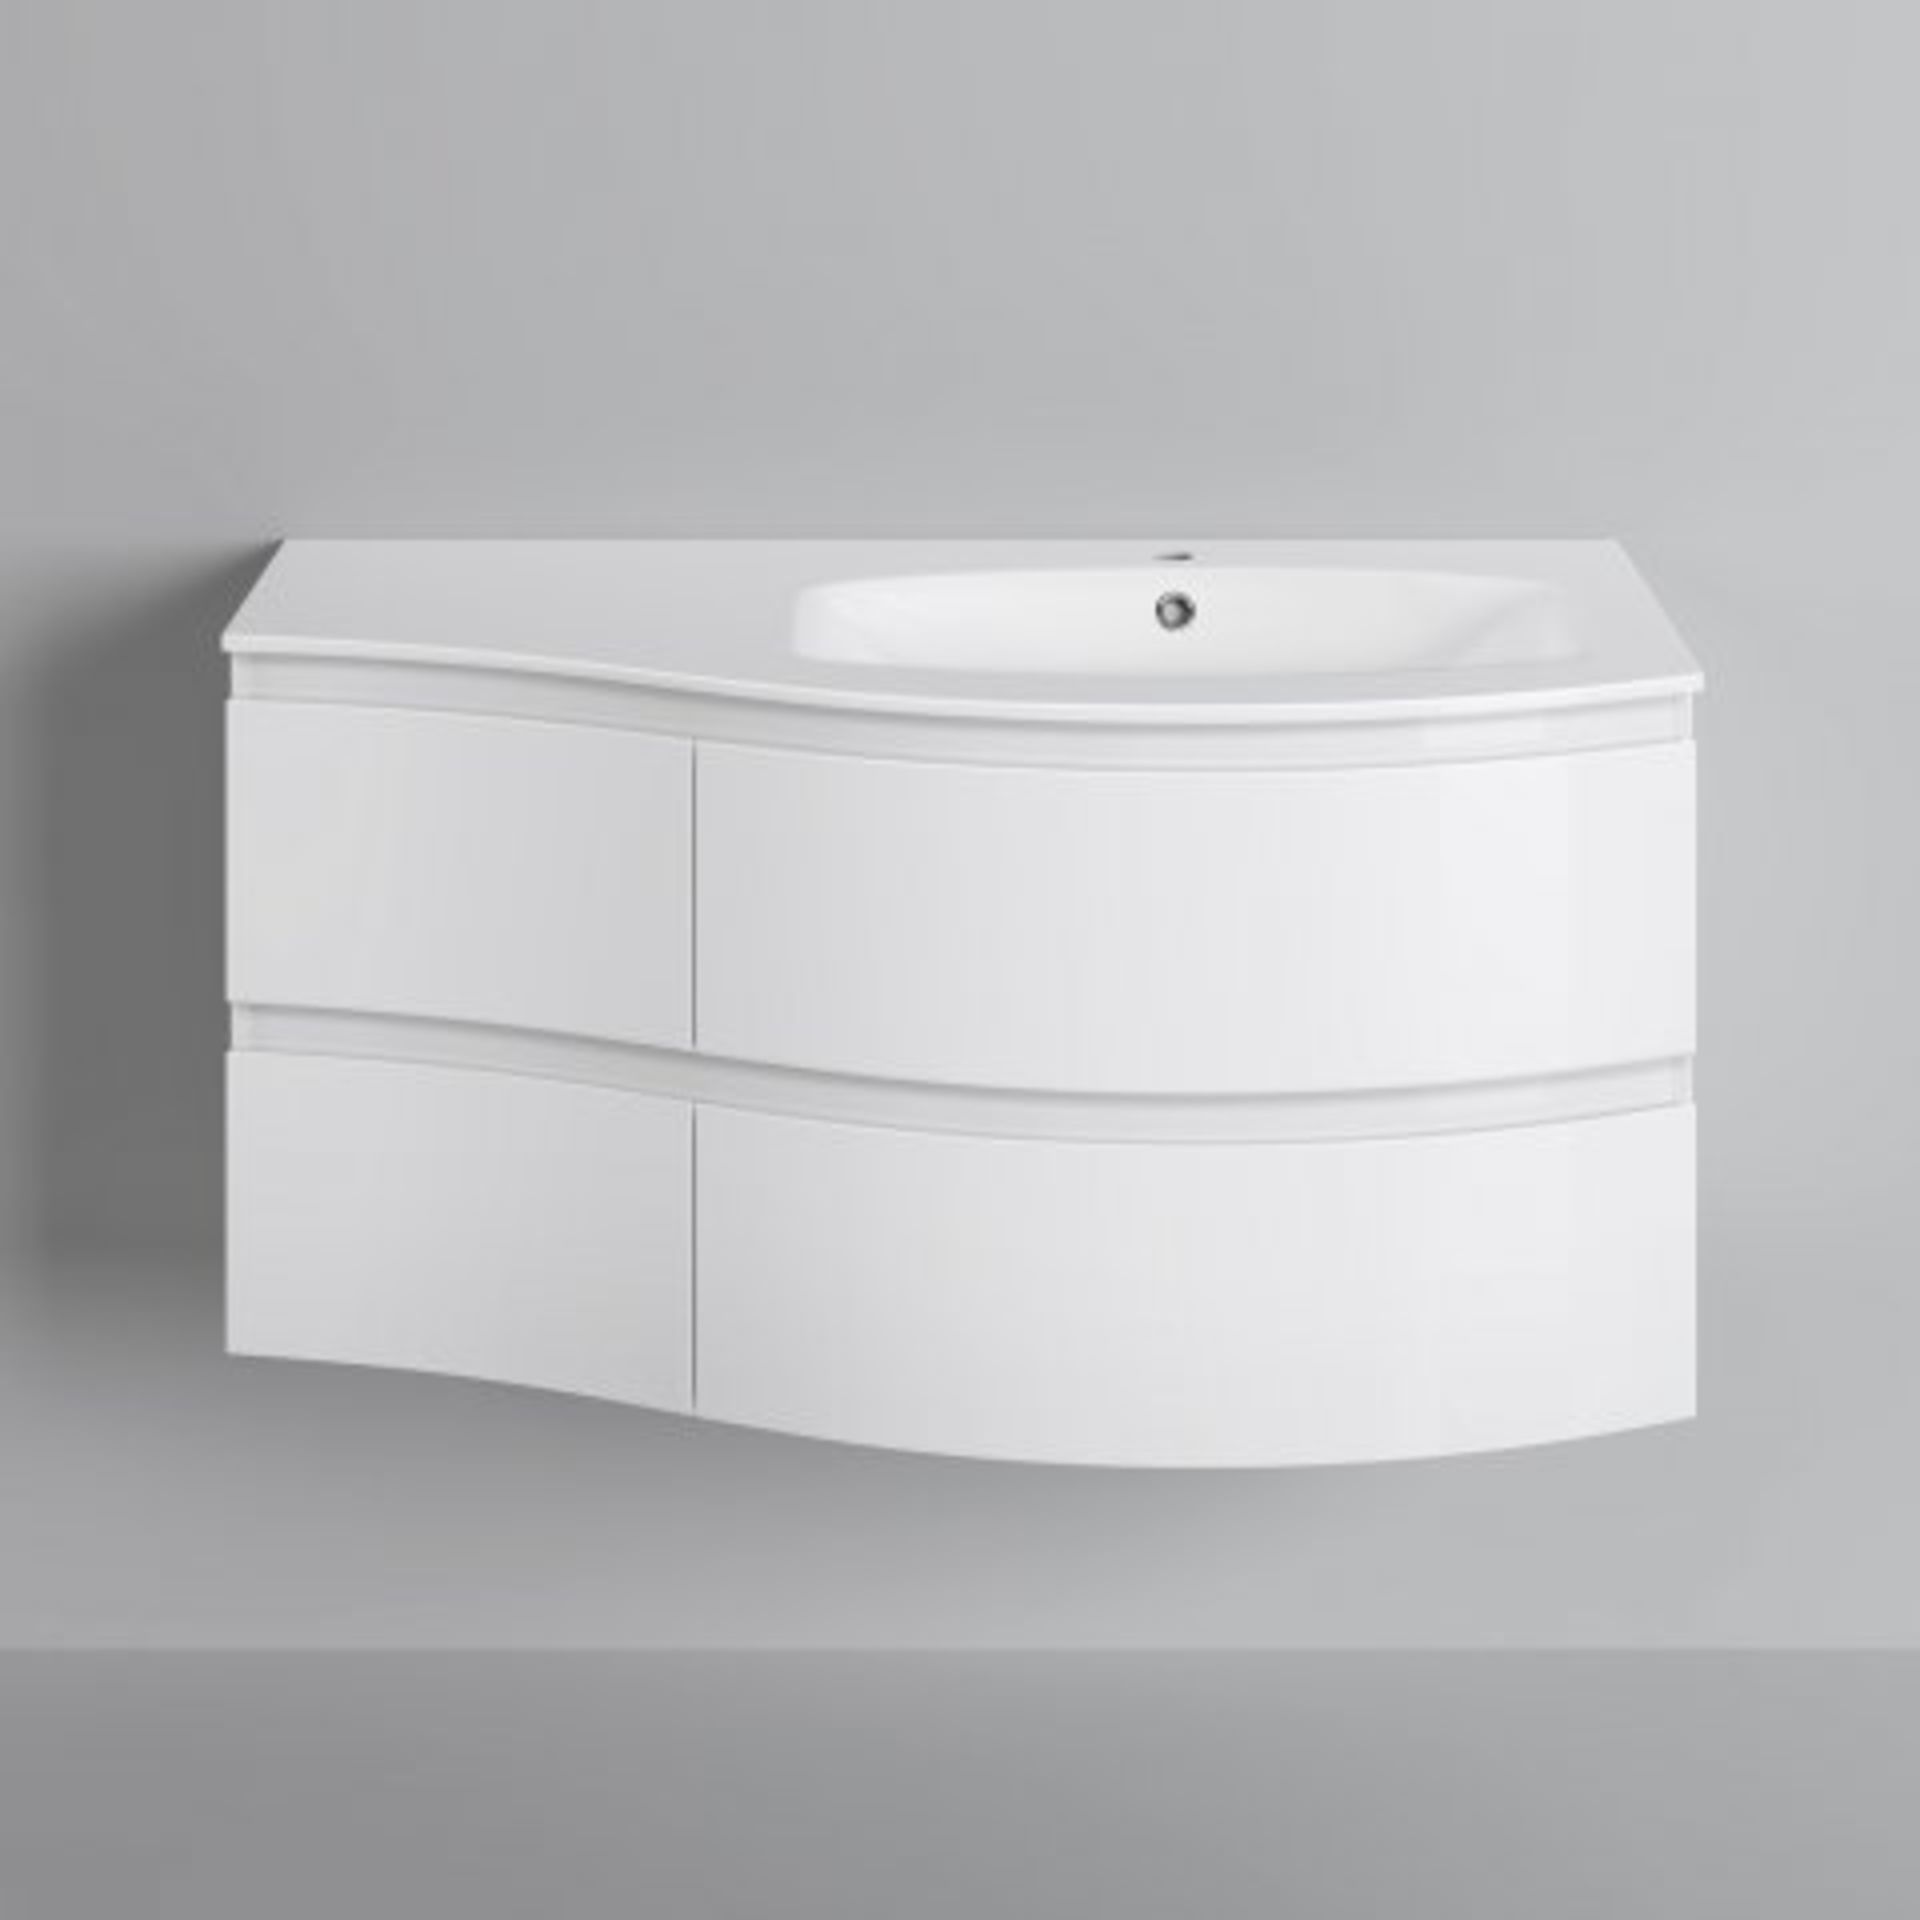 (I2) 1040mm Amelie High Gloss White Curved Vanity Unit - Right Hand - Wall Hung. RRP £1,249. COMES - Image 5 of 5